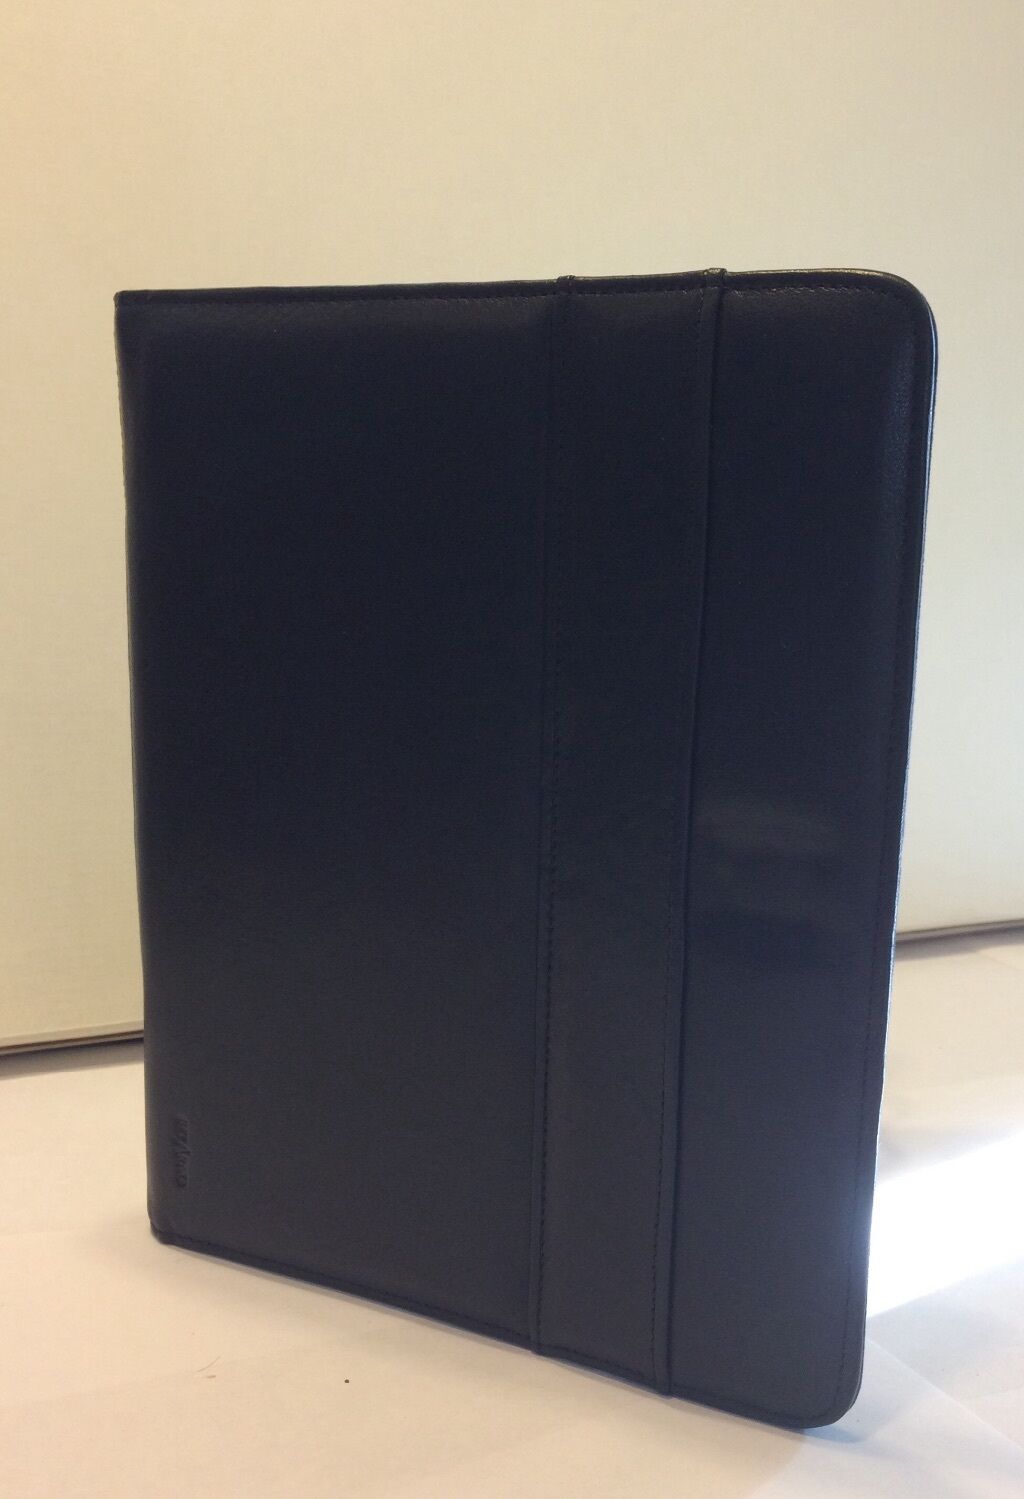 Belarno iPad  black  leather cover  new. Retails at $94